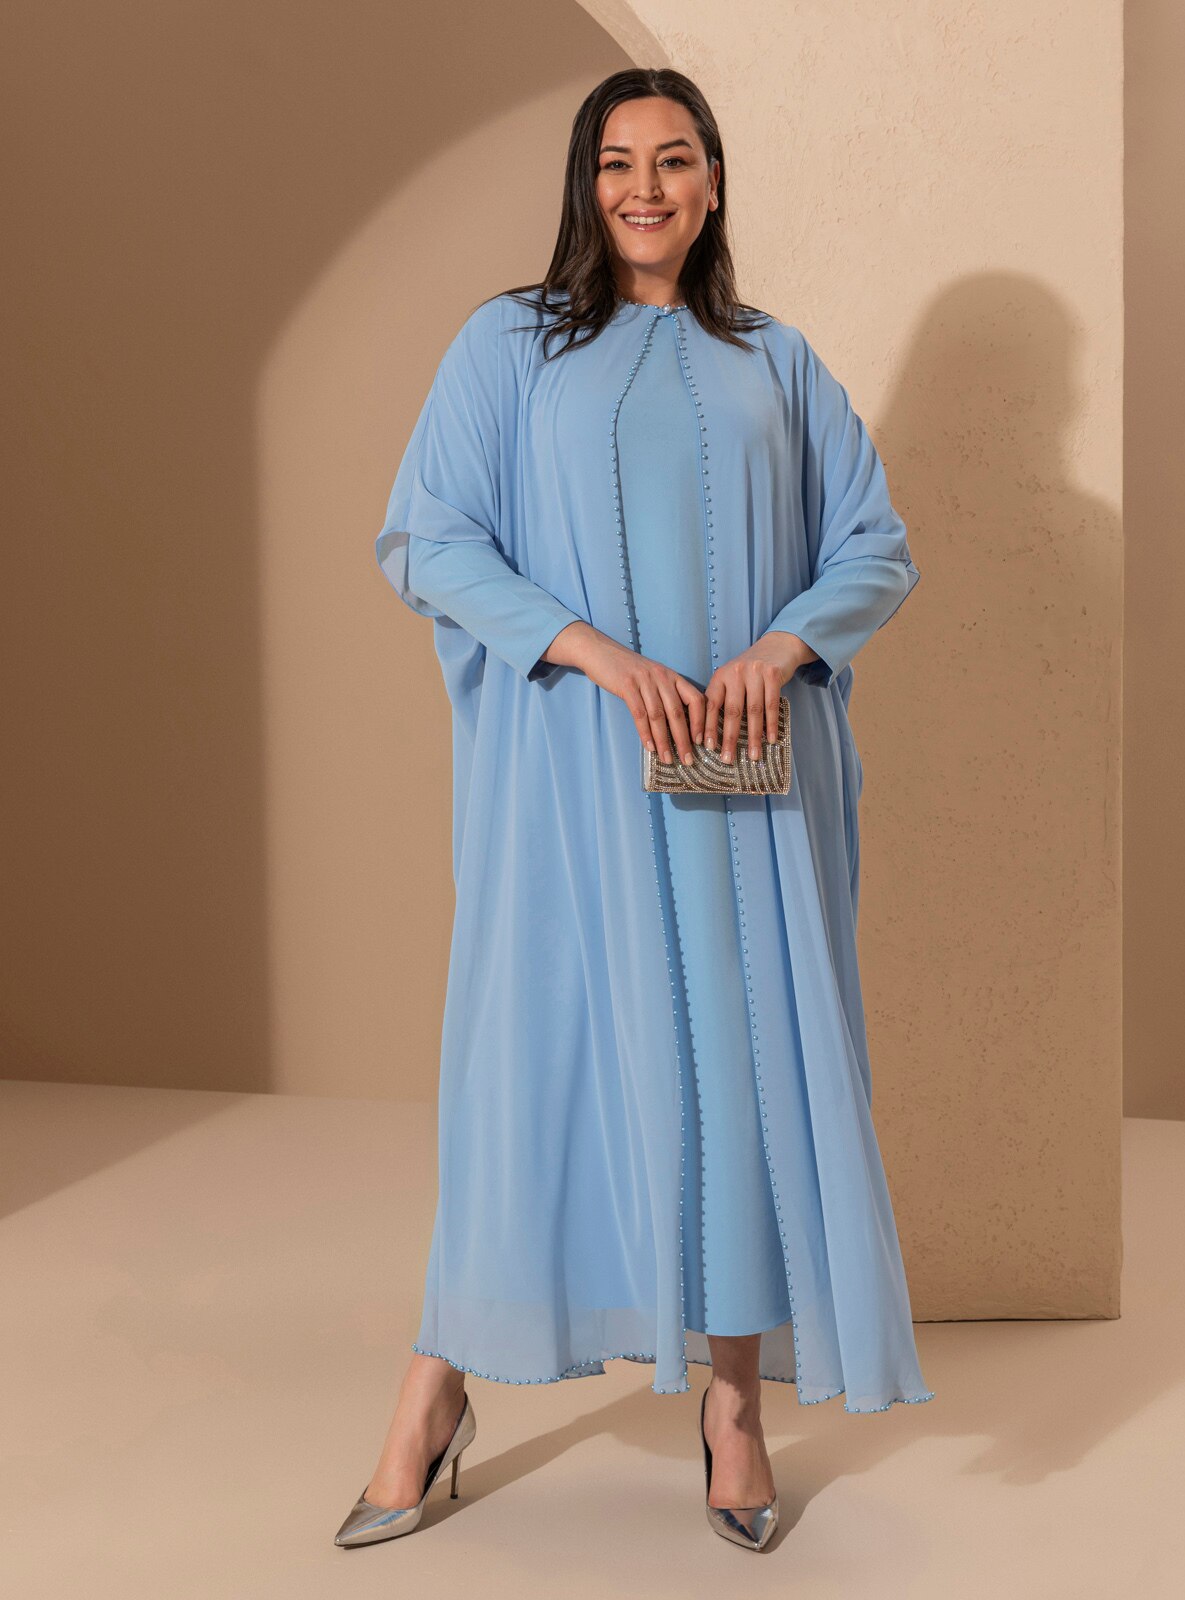 Ice Blue - Crew neck - Fully Lined - Plus Size Evening Suit